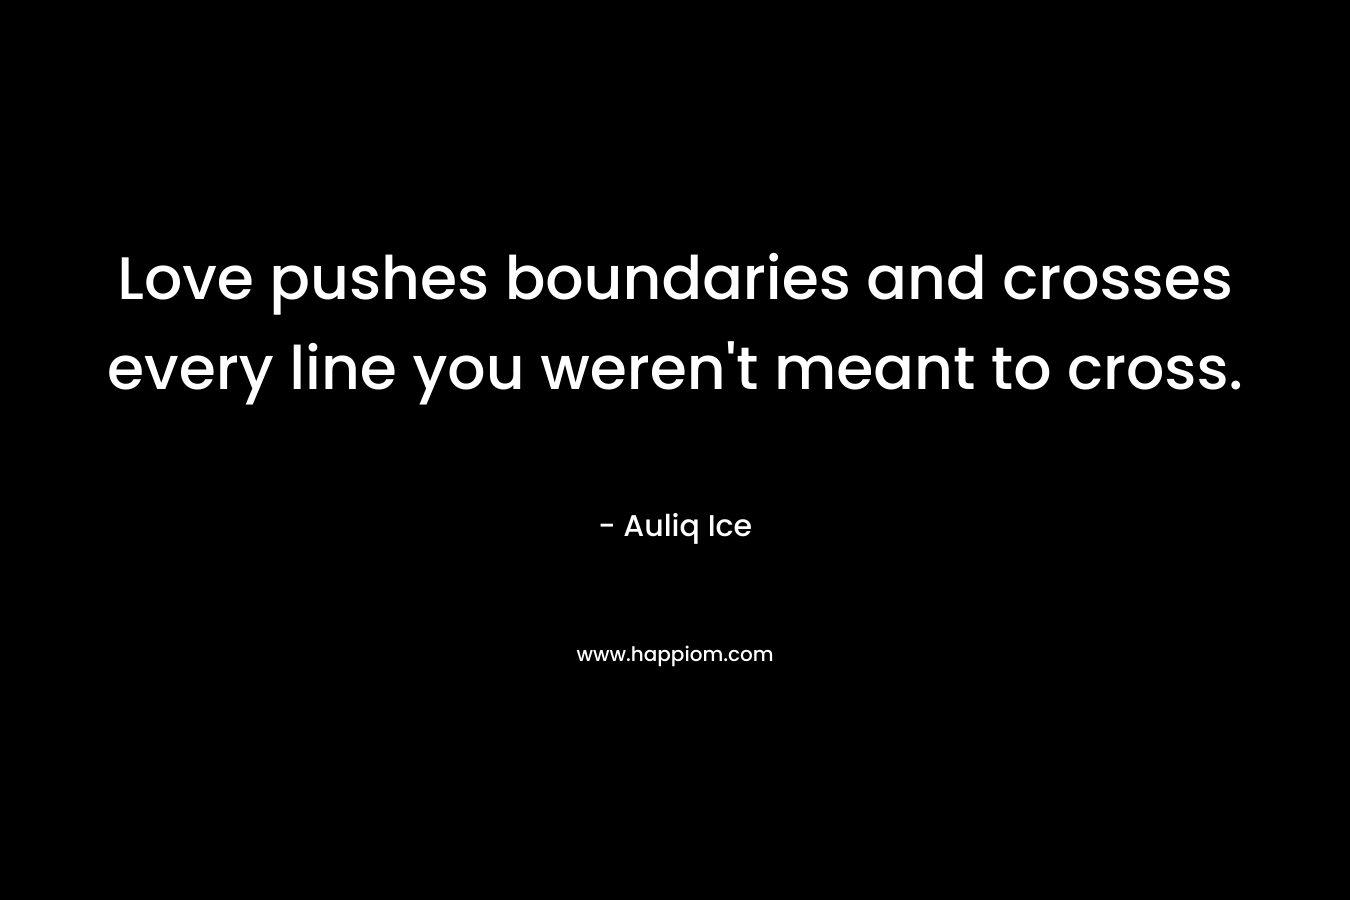 Love pushes boundaries and crosses every line you weren’t meant to cross. – Auliq Ice